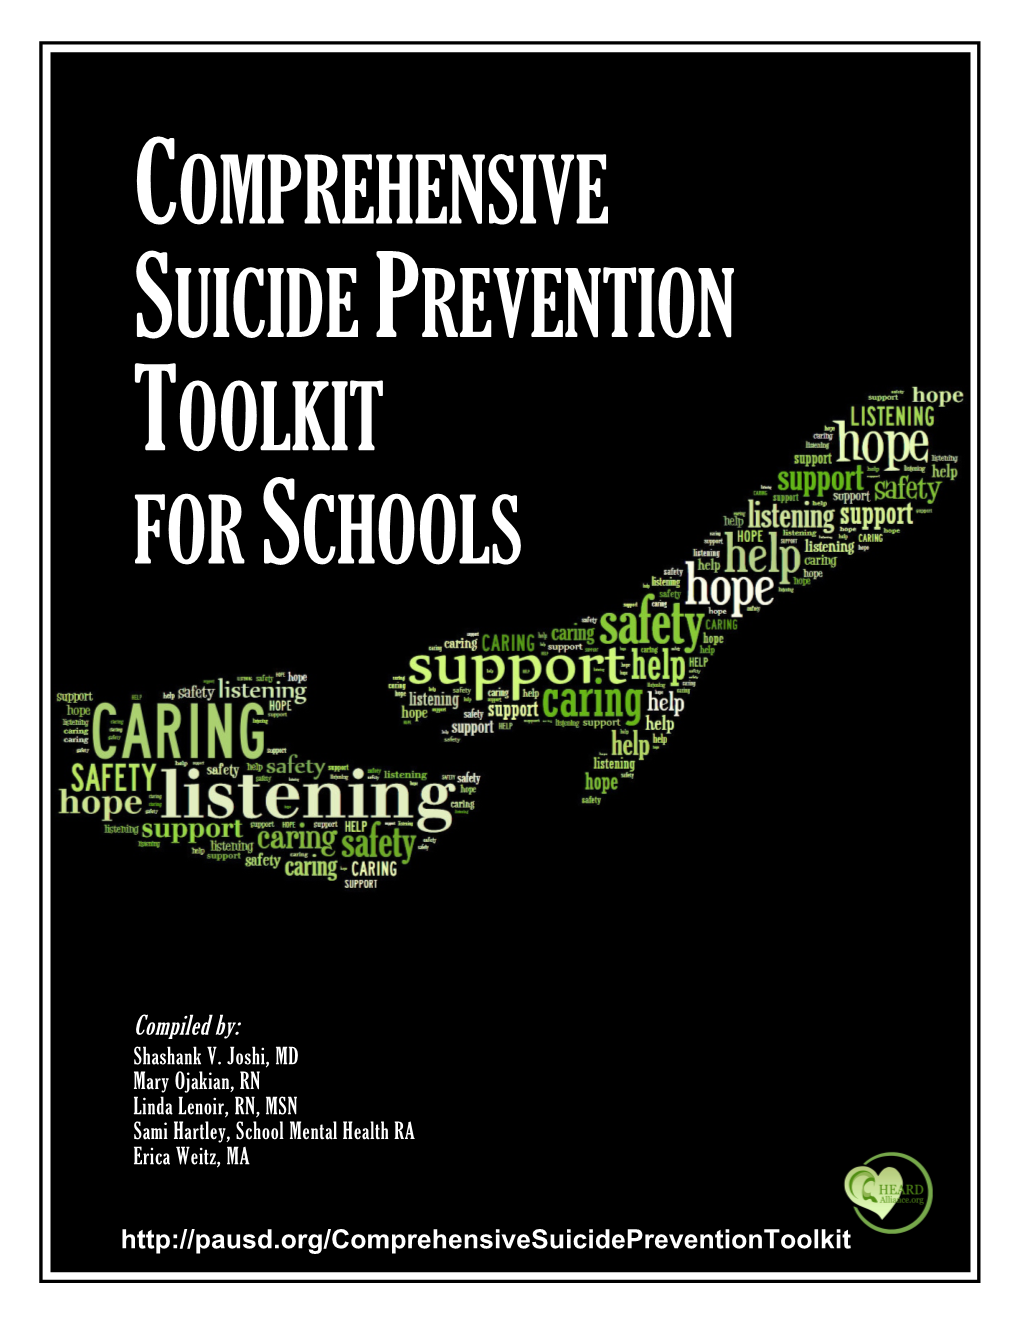 Comprehensive Suicide Prevention Toolkit for Schools